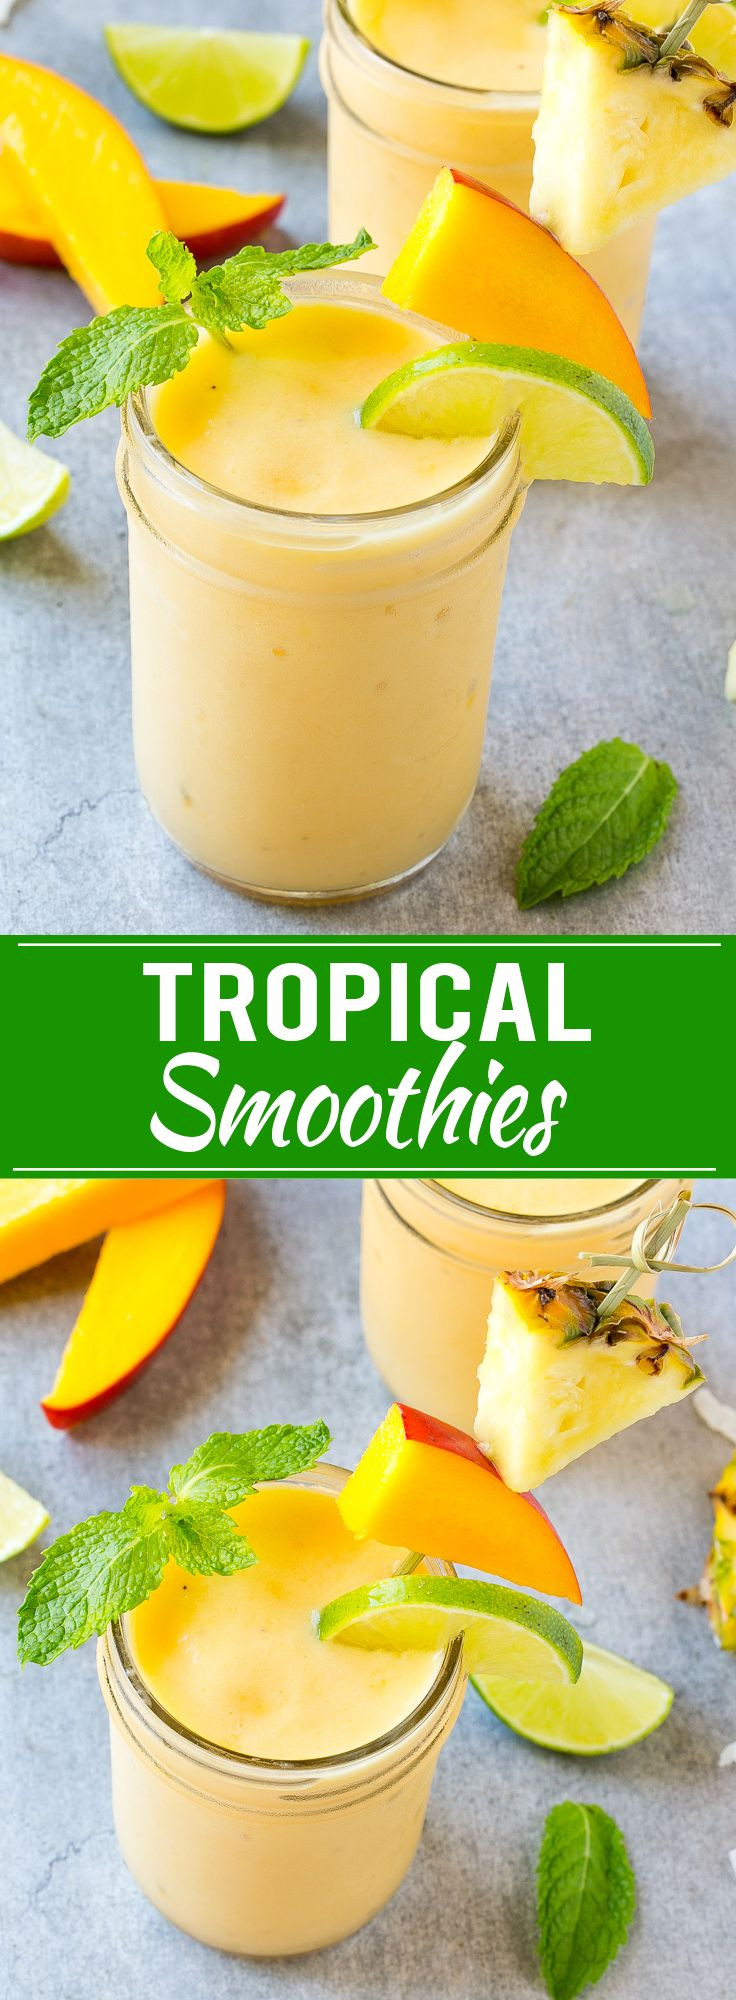 Easy And Healthy Smoothies
 Best 25 Tropical smoothie recipes ideas on Pinterest